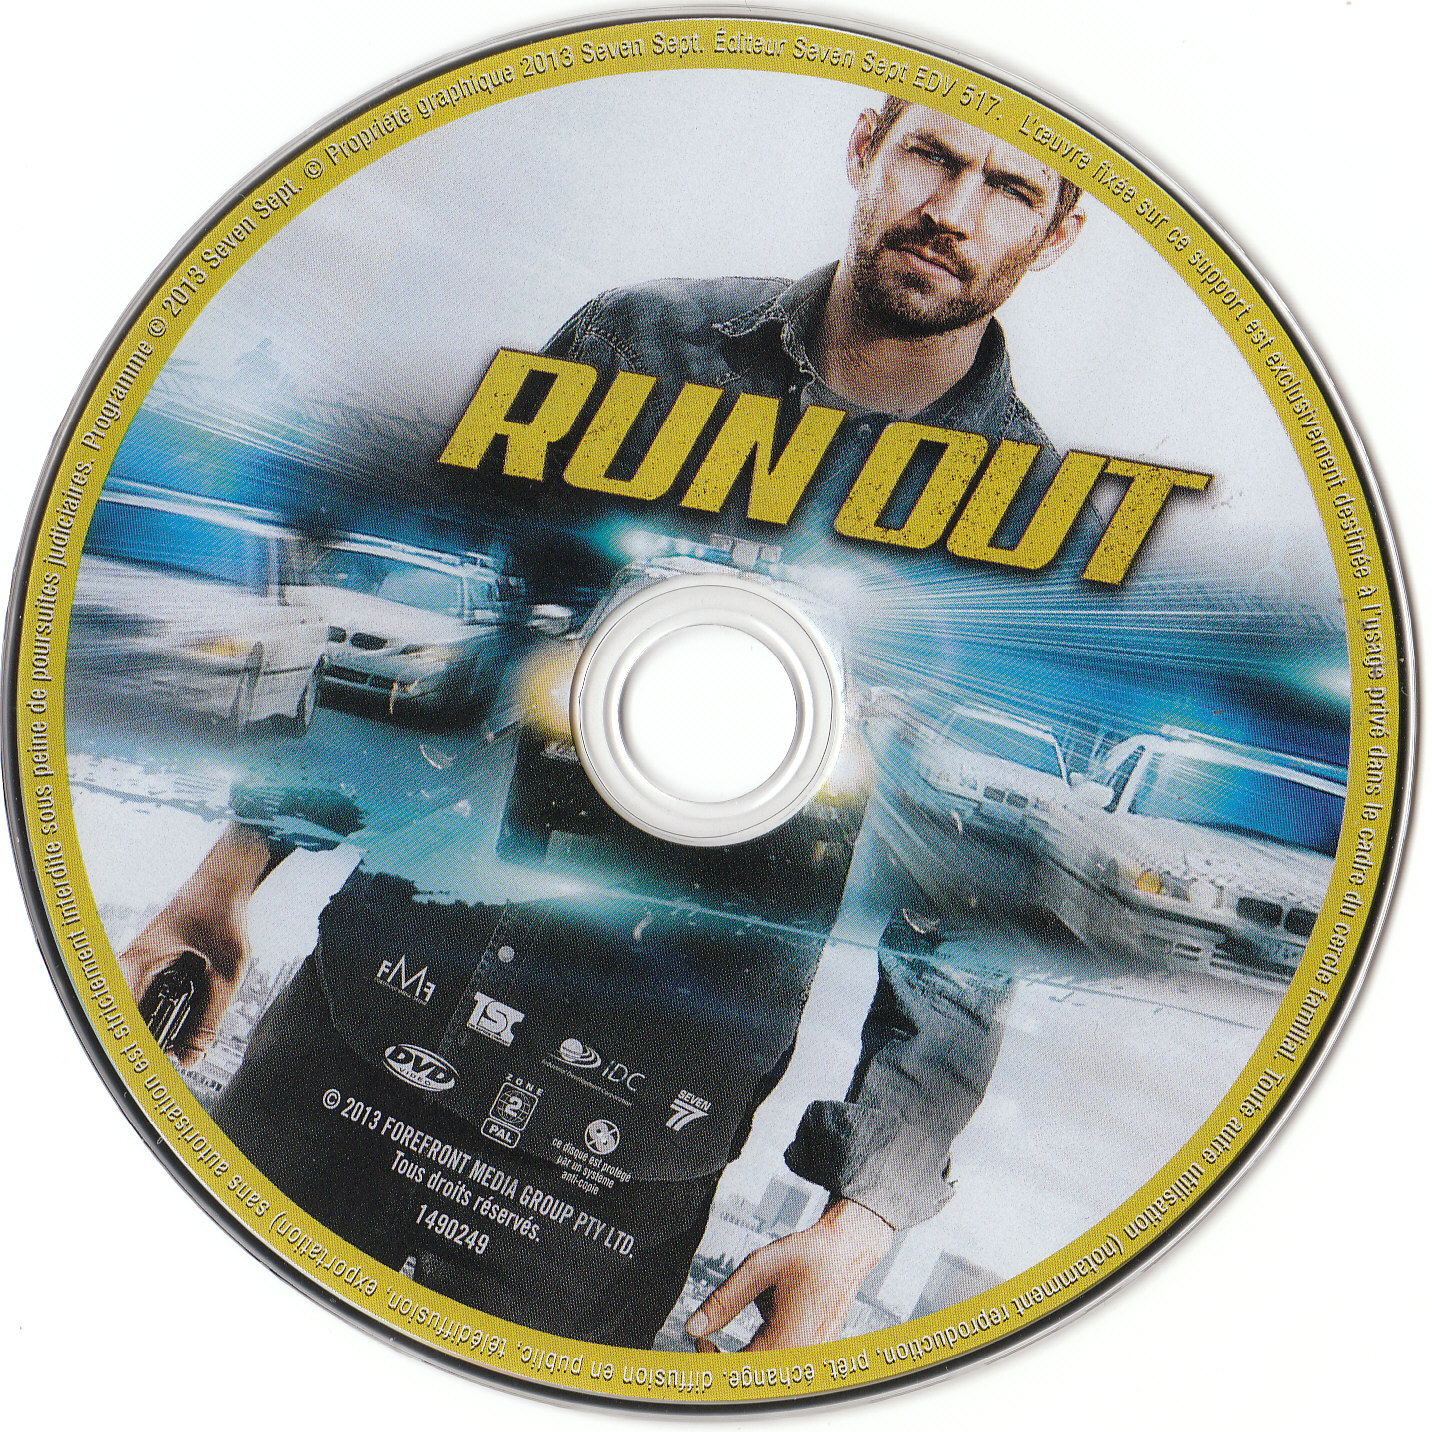 Run Out